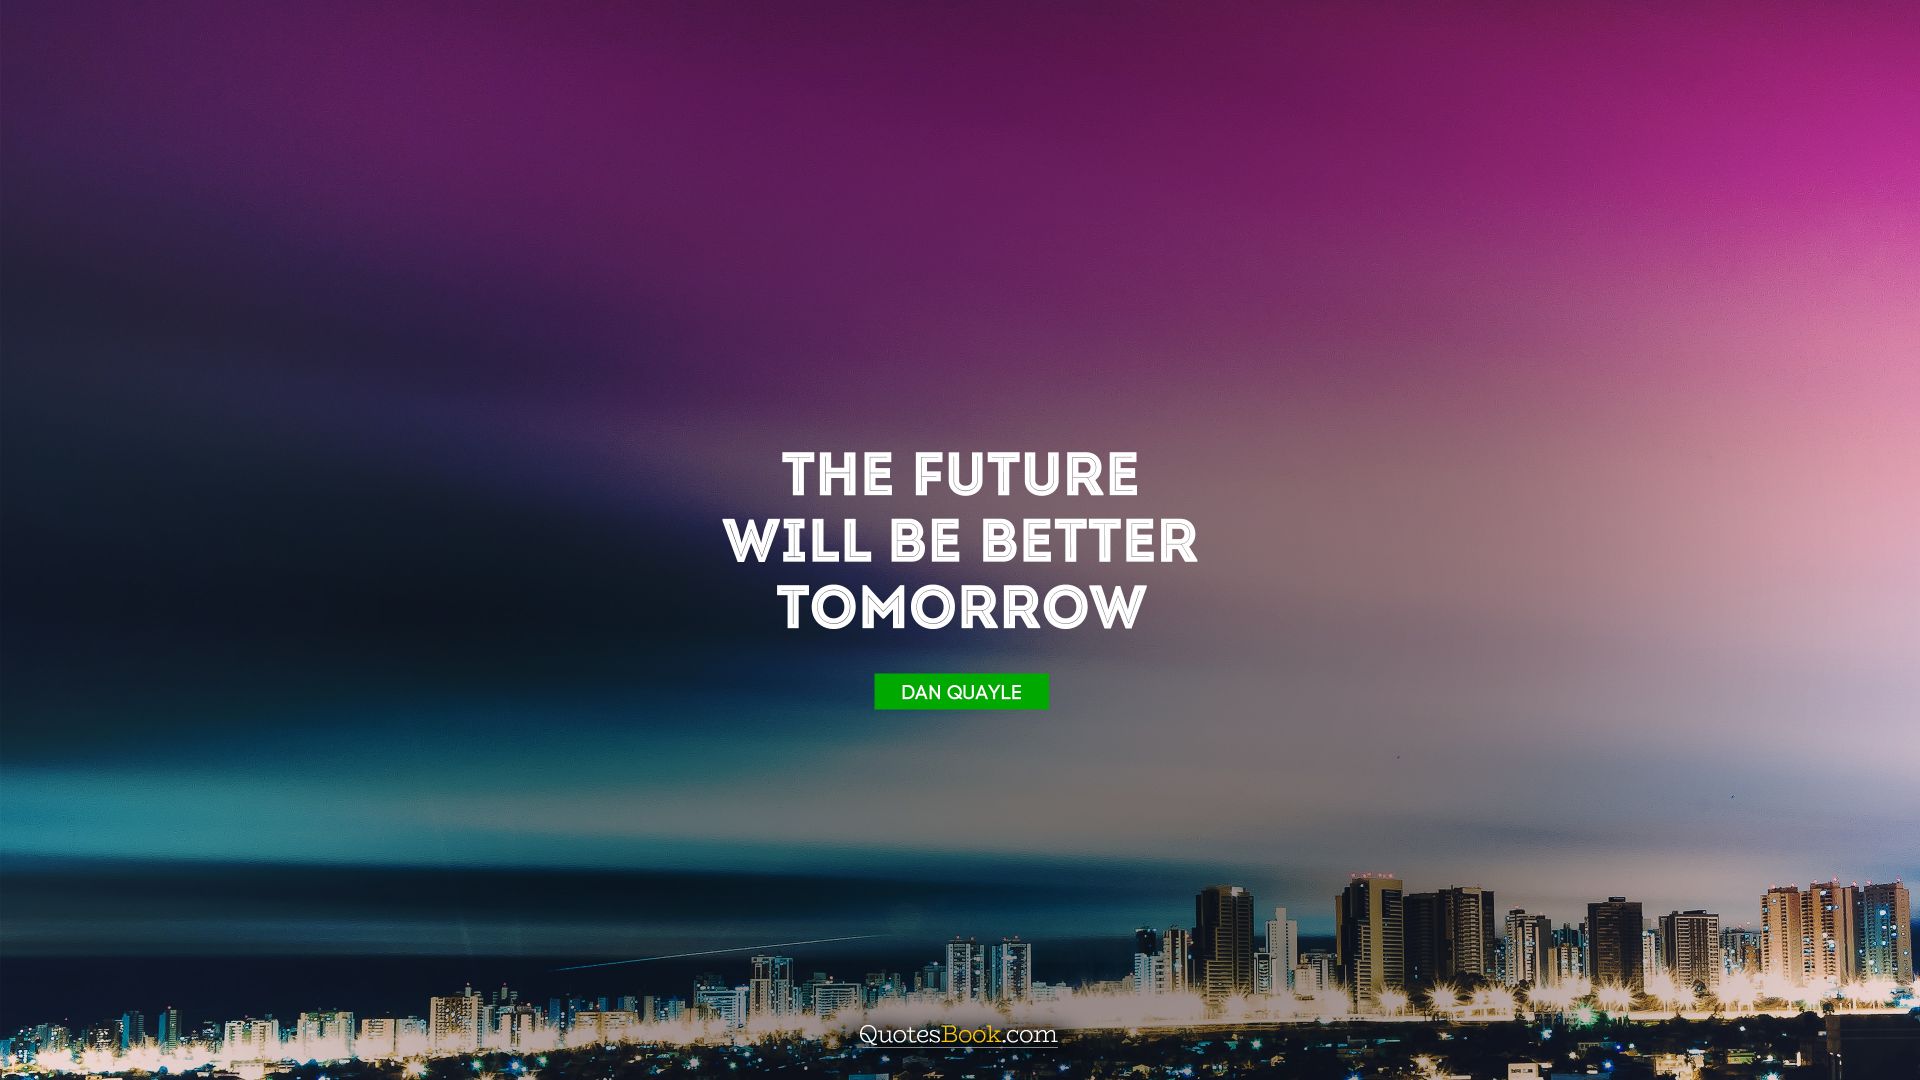 The future will be better tomorrow. - Quote by Dan Quayle